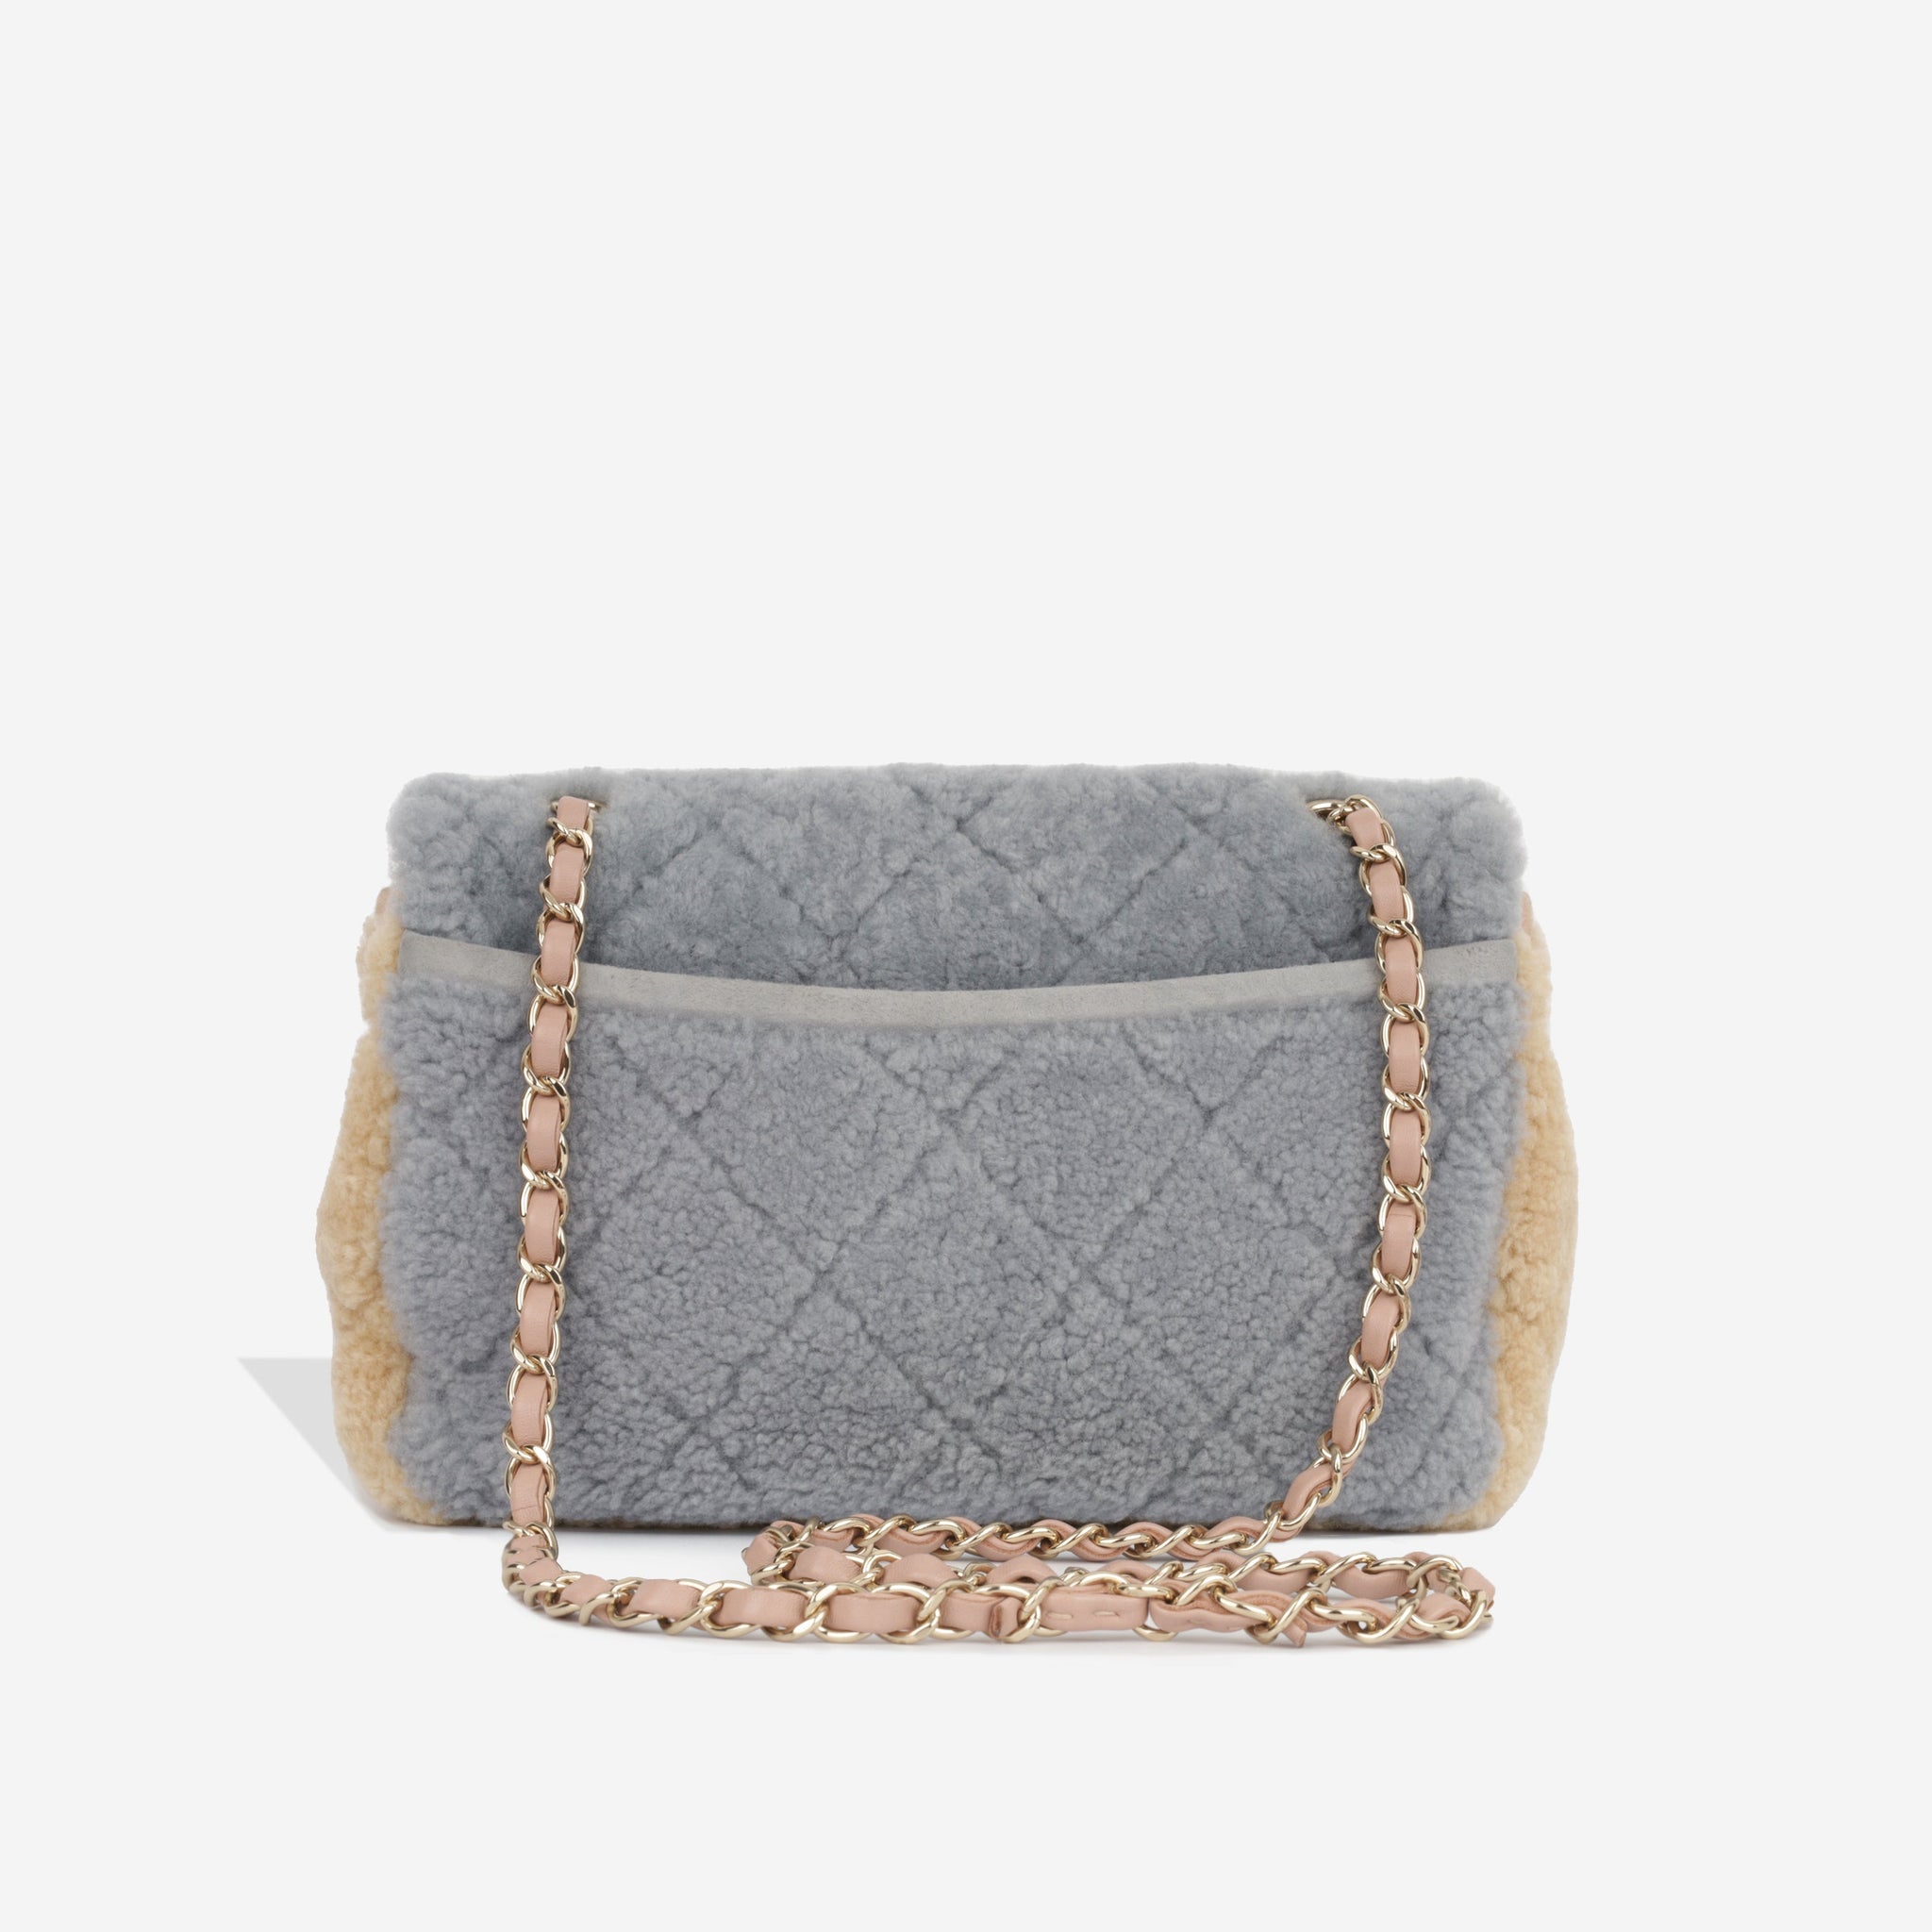 Chanel - Shearling Fur Flap - Multi Pastel - CGHW - Immaculate